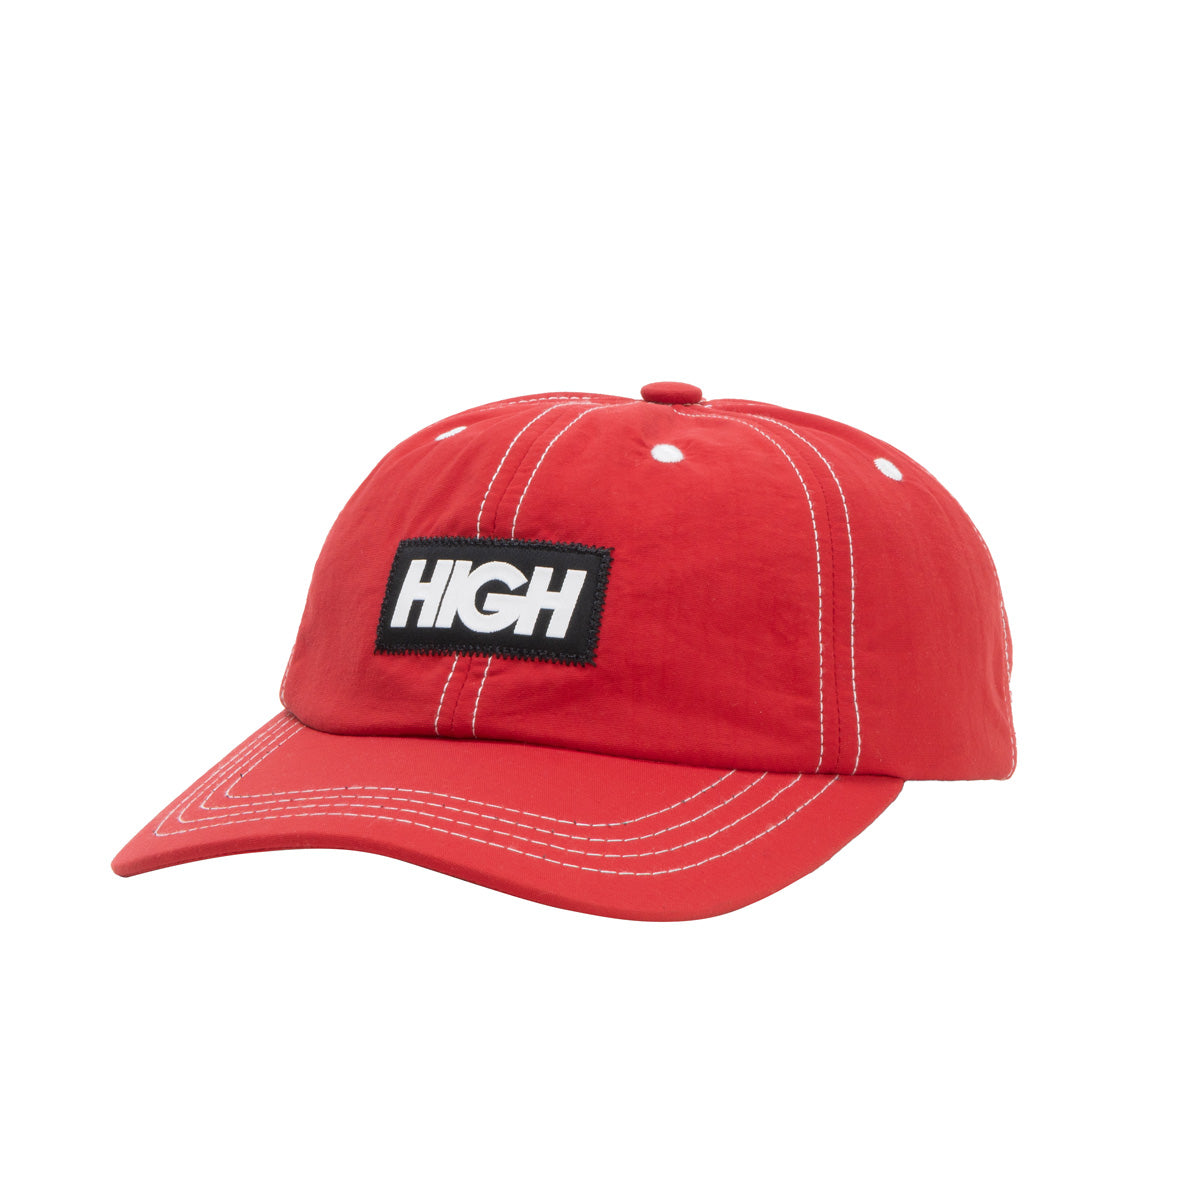 High Company 6 Panel Ripstop Colored Red